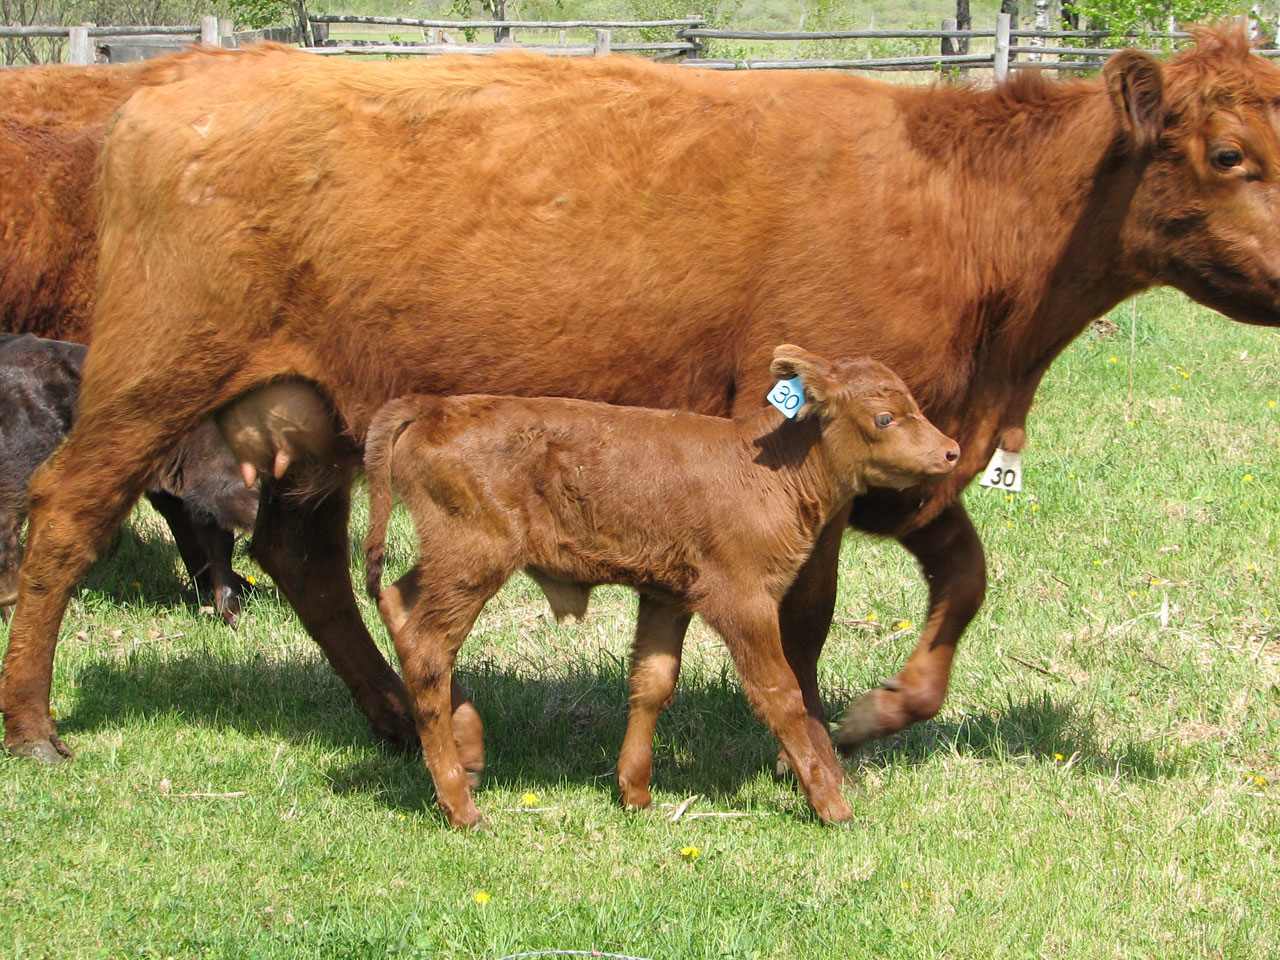 Calf And Cow